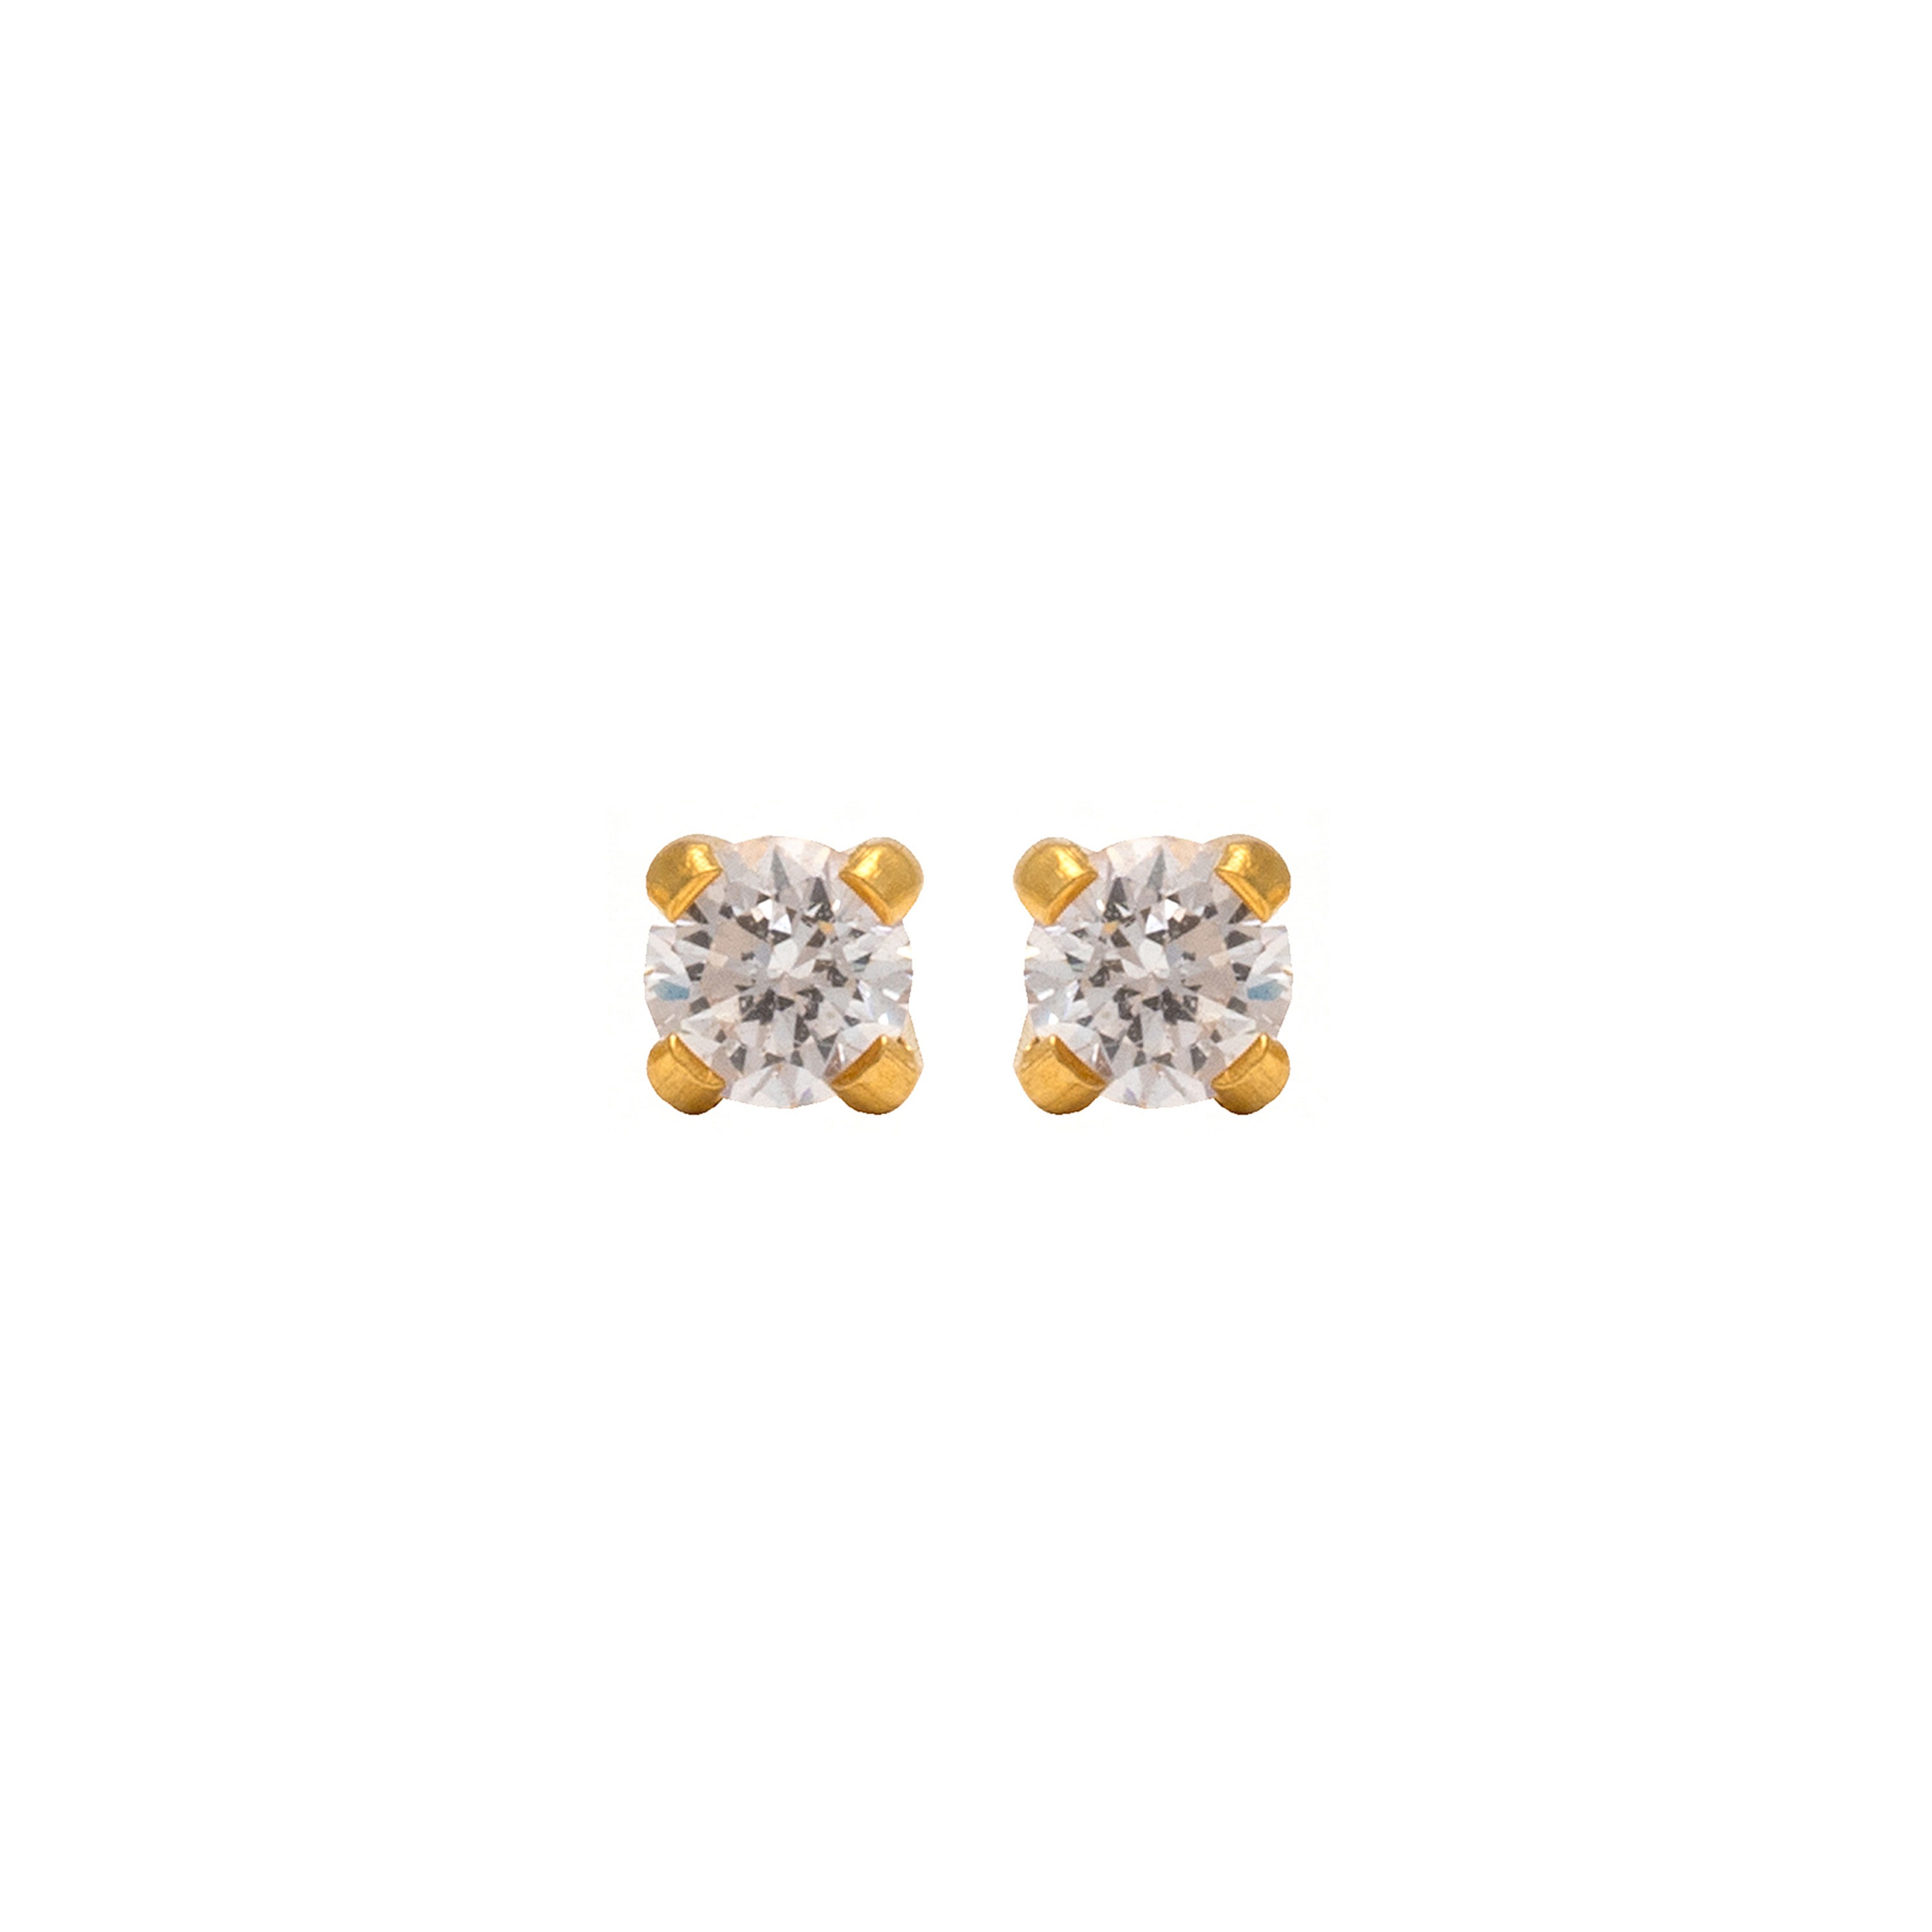 3MM - Cubic Zirconia (Round) - Crystal Clear | 24K Pure Gold Plated Piercing Earrings with Ear Piercing Gun | Studex System75